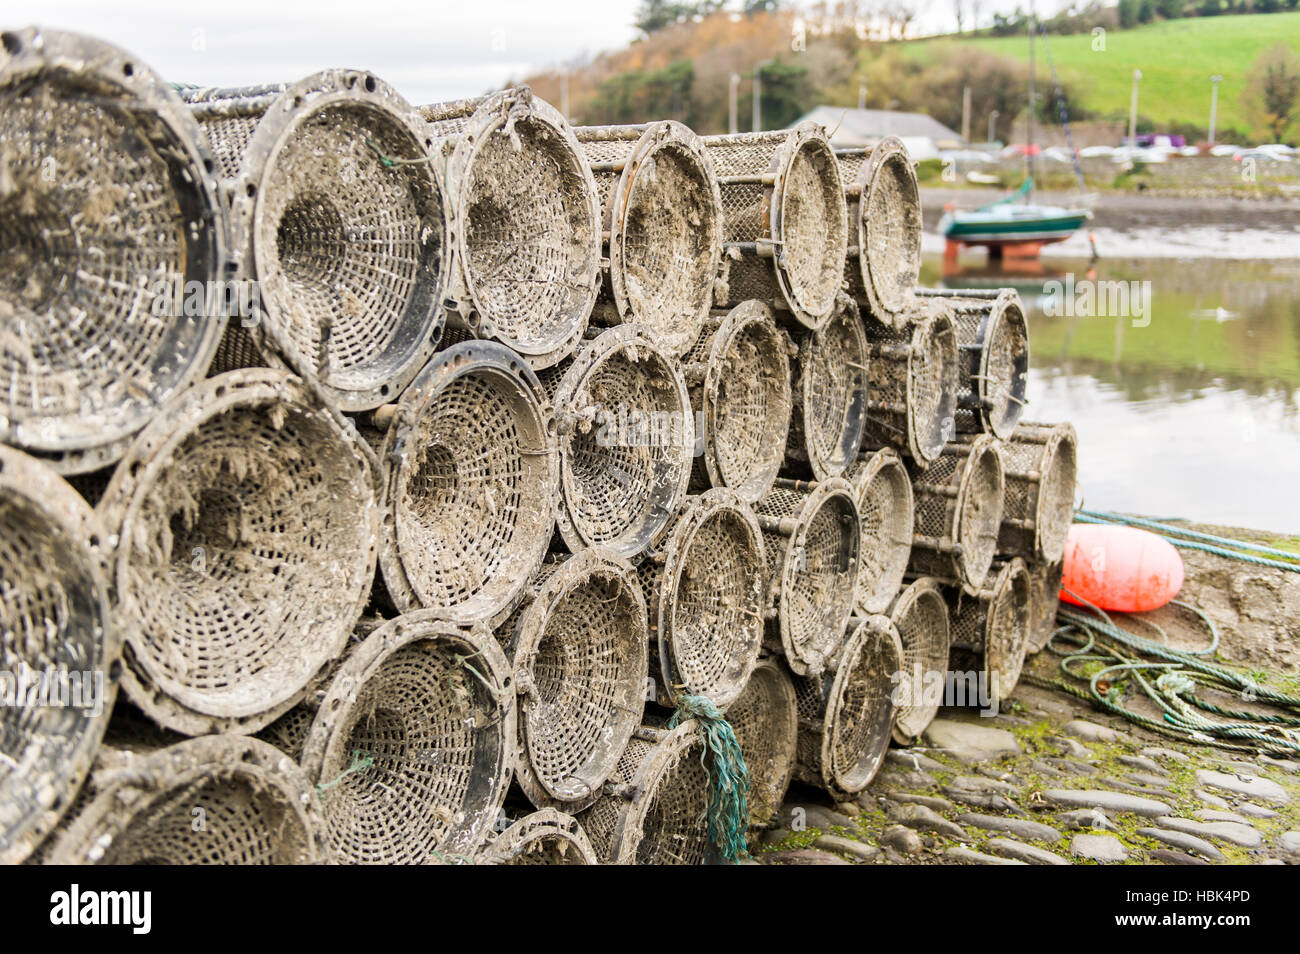 A stack of creels or crab and/or lobster pots on the dock in harbour in Ireland. Stock Photo